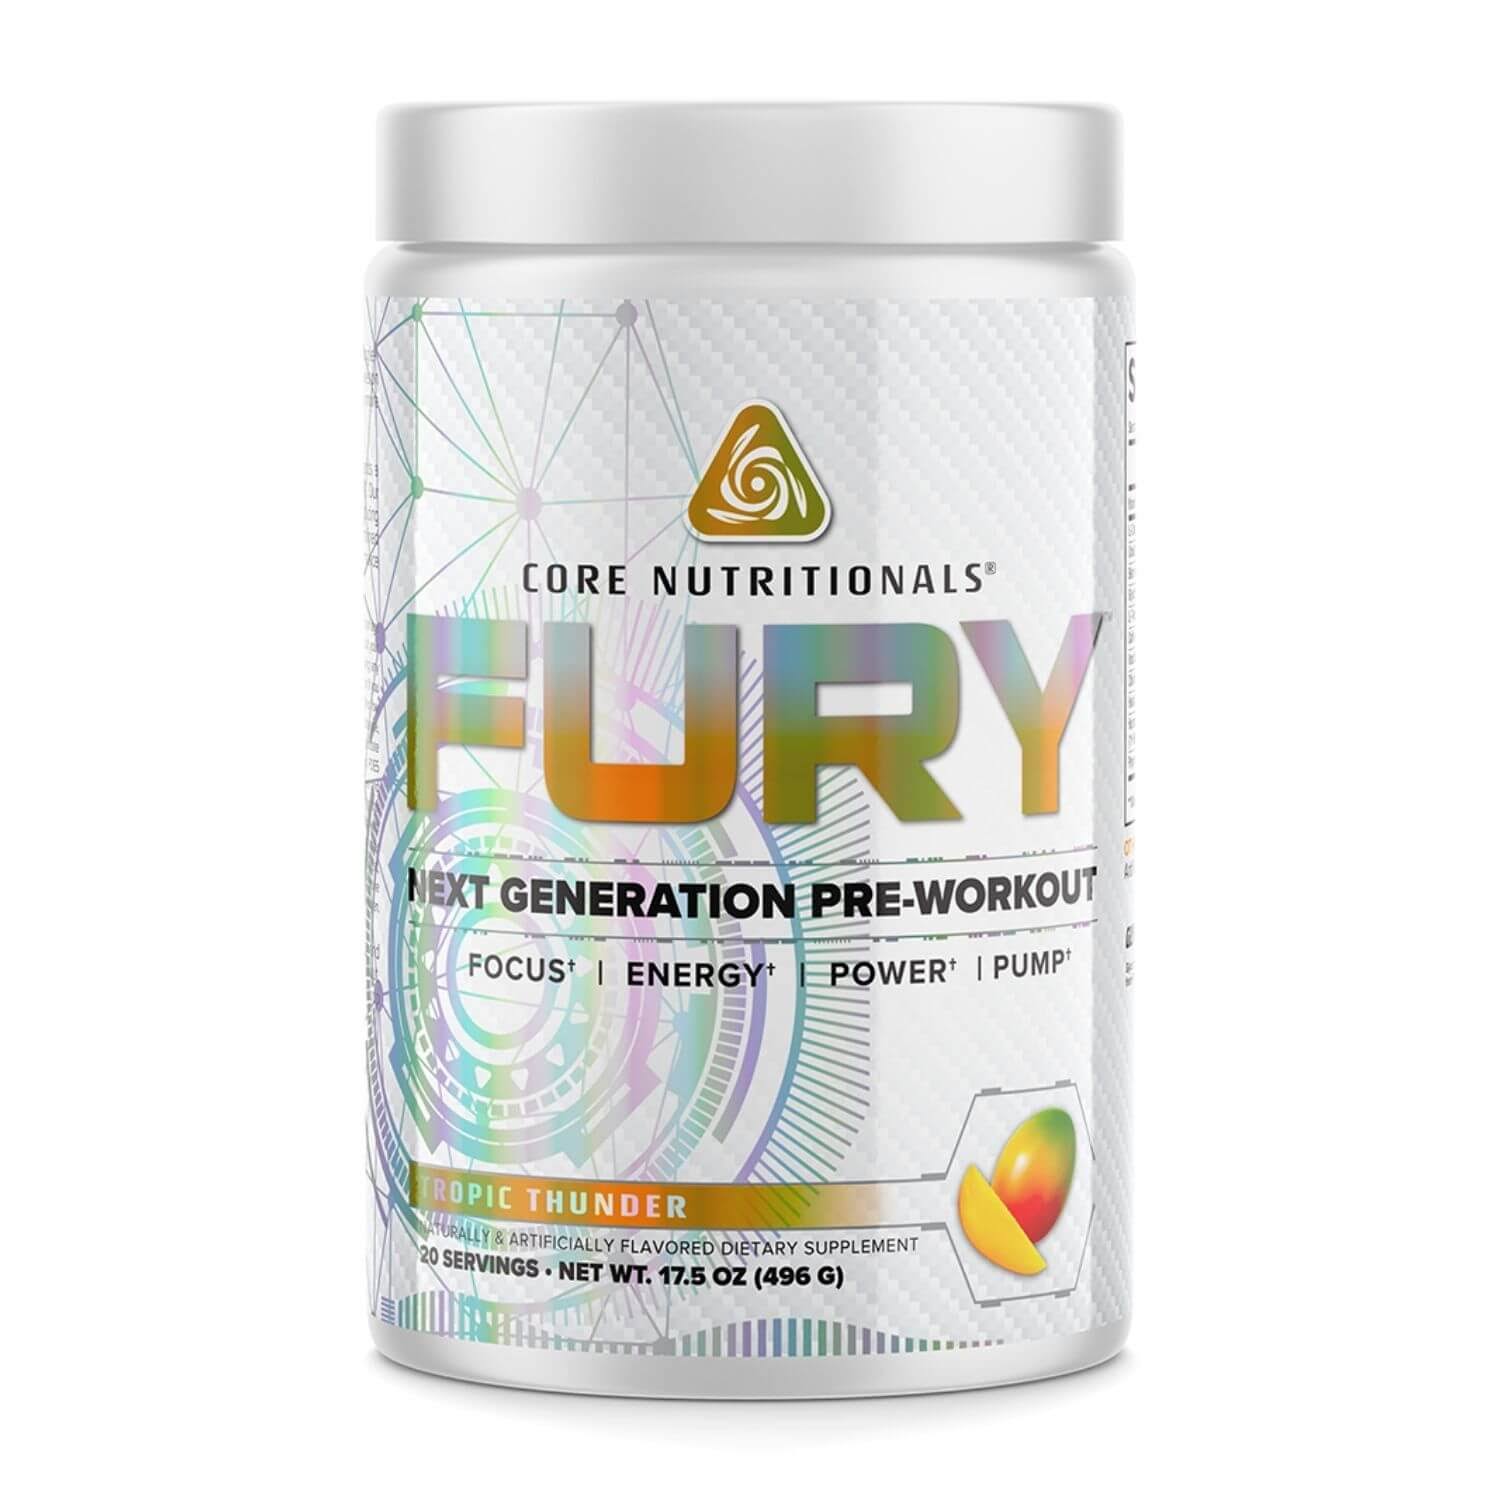 Core Nutritionals Fury - 20 Servings Tropic Thunder